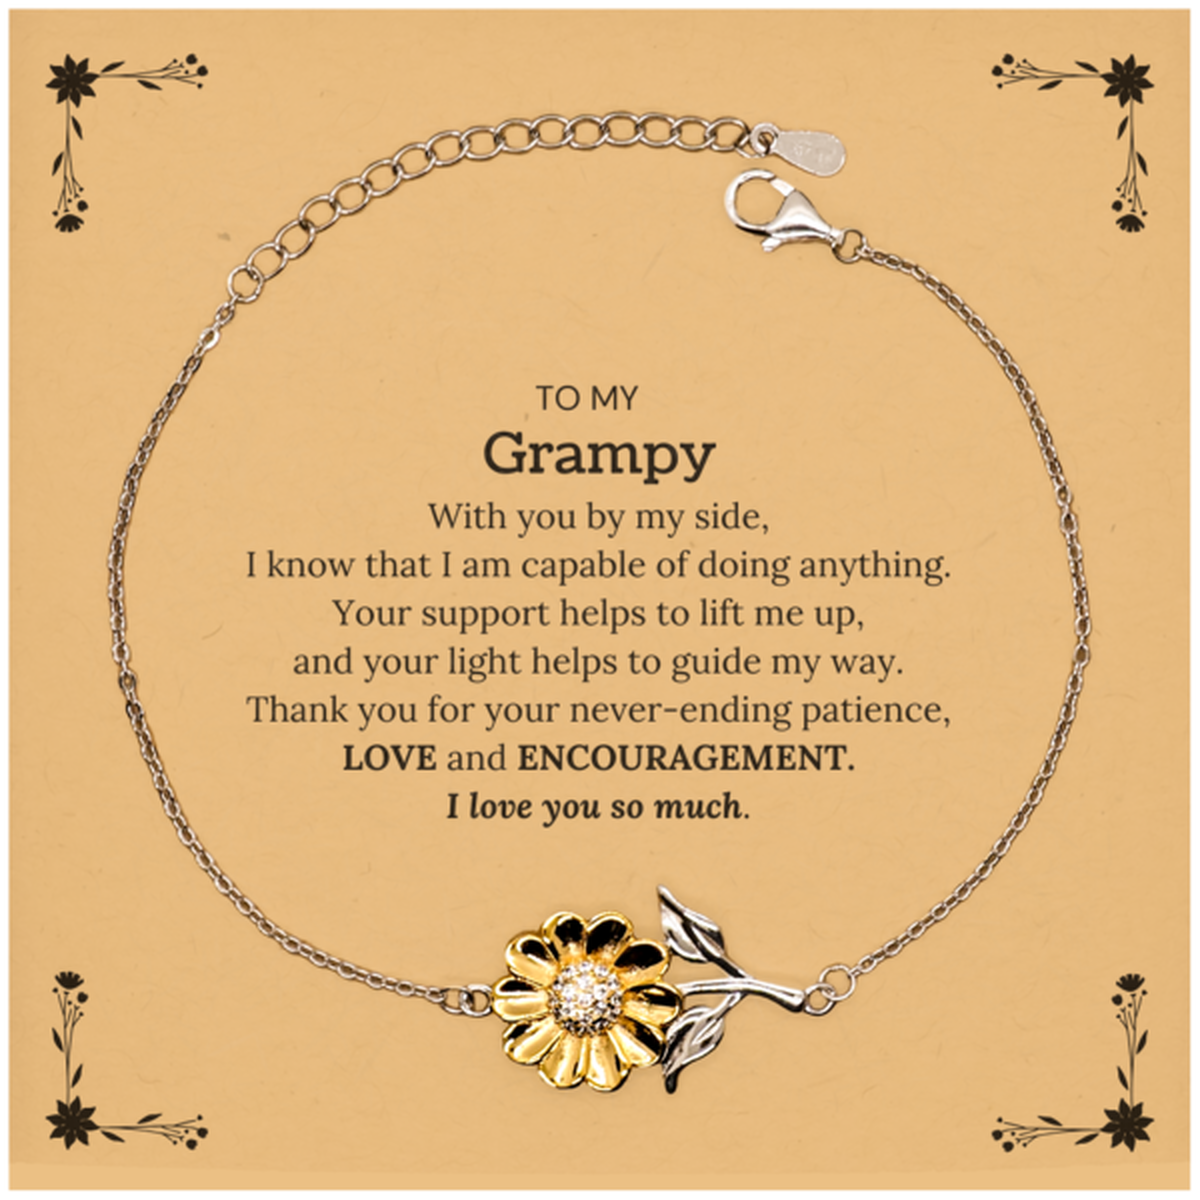 Appreciation Grampy Sunflower Bracelet Gifts, To My Grampy Birthday Christmas Wedding Keepsake Gifts for Grampy With you by my side, I know that I am capable of doing anything. I love you so much